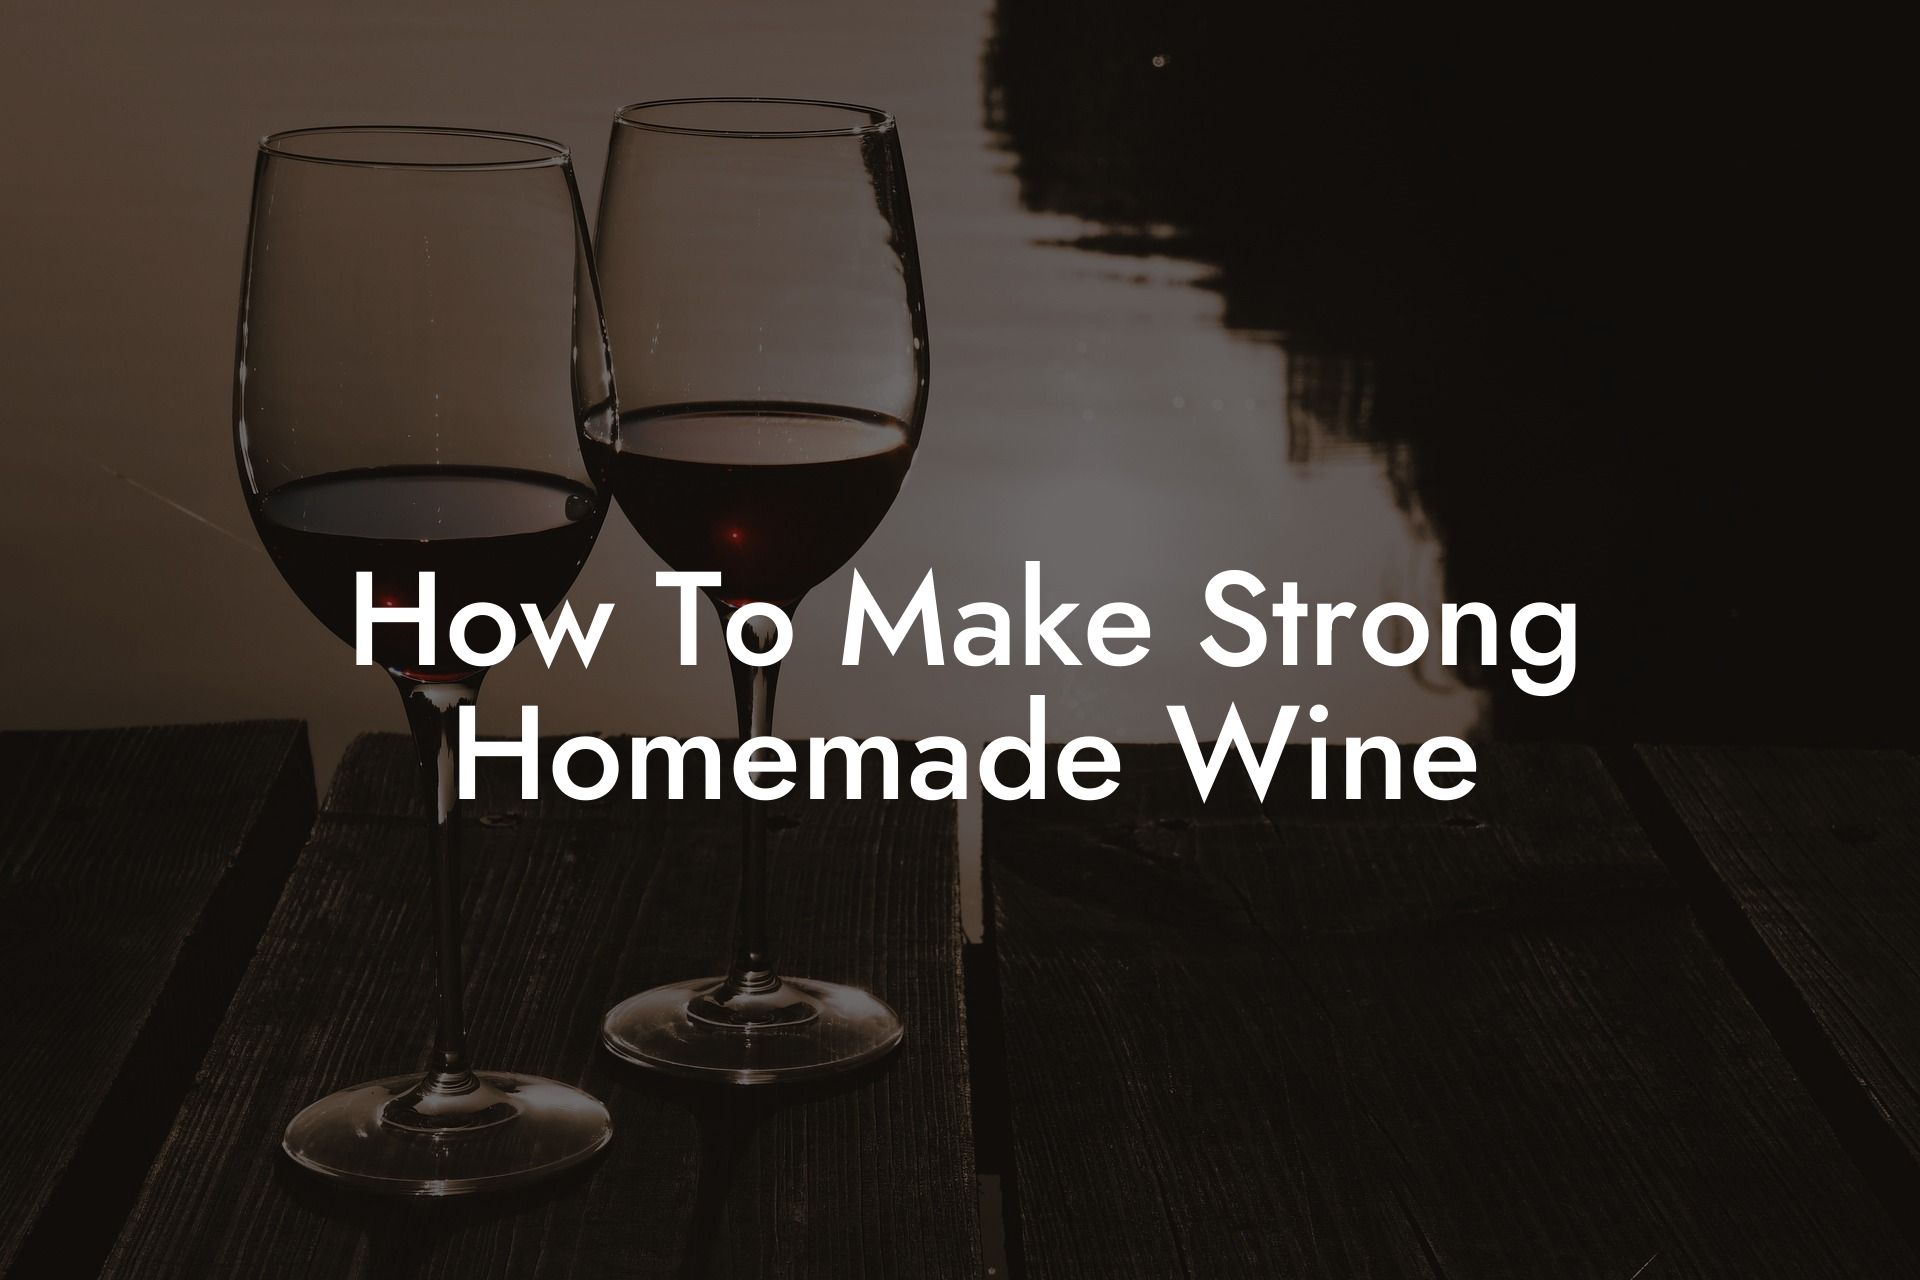 How To Make Strong Homemade Wine